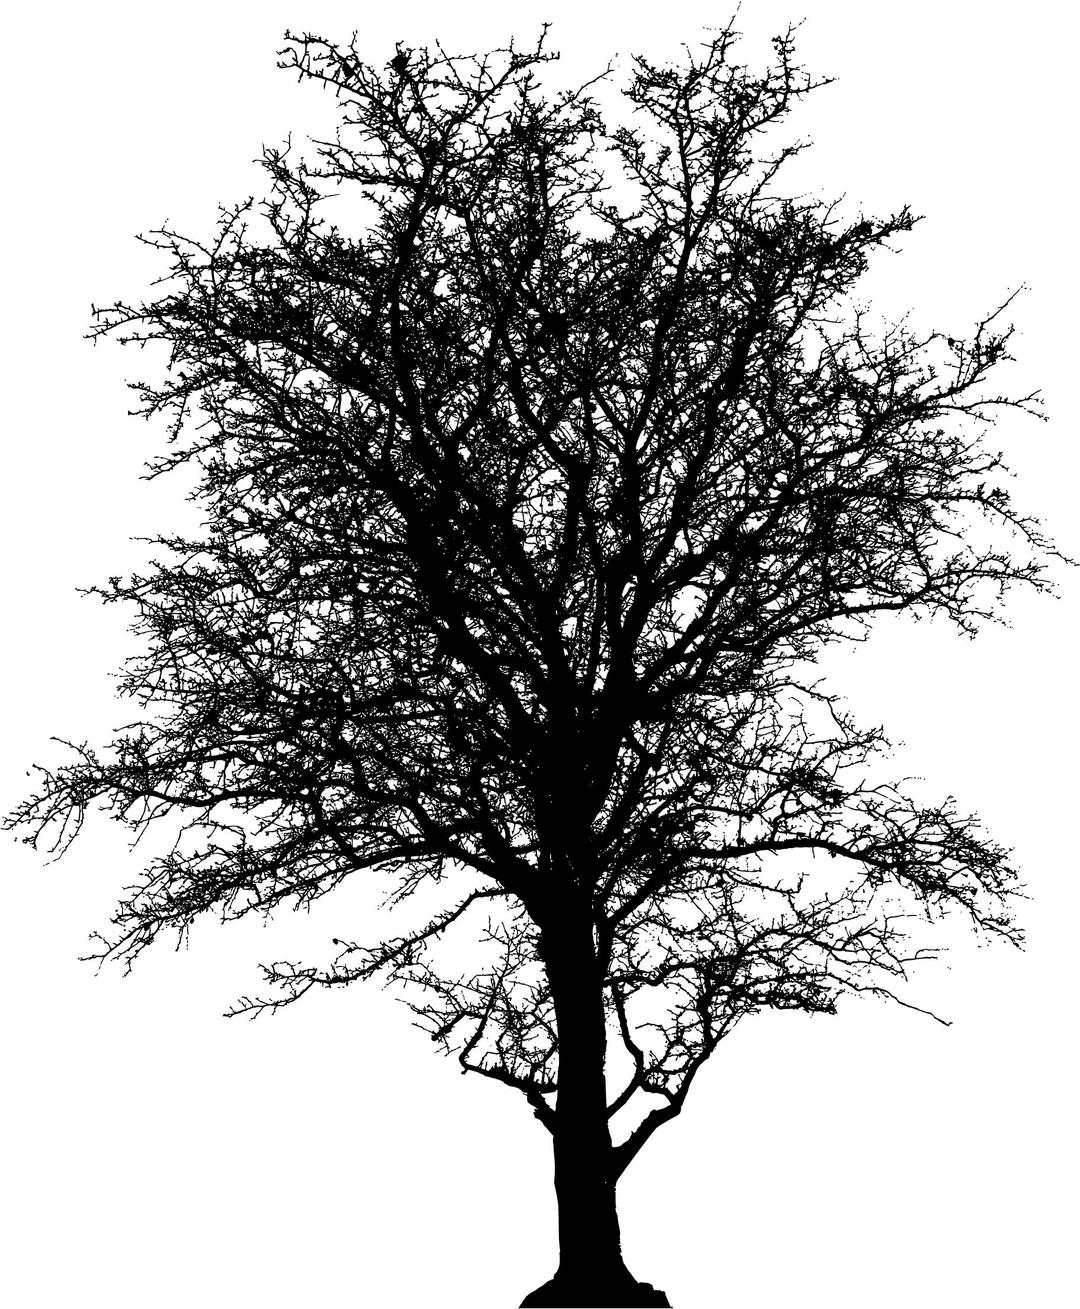 Leafless Barren Tree Silhouette png transparent